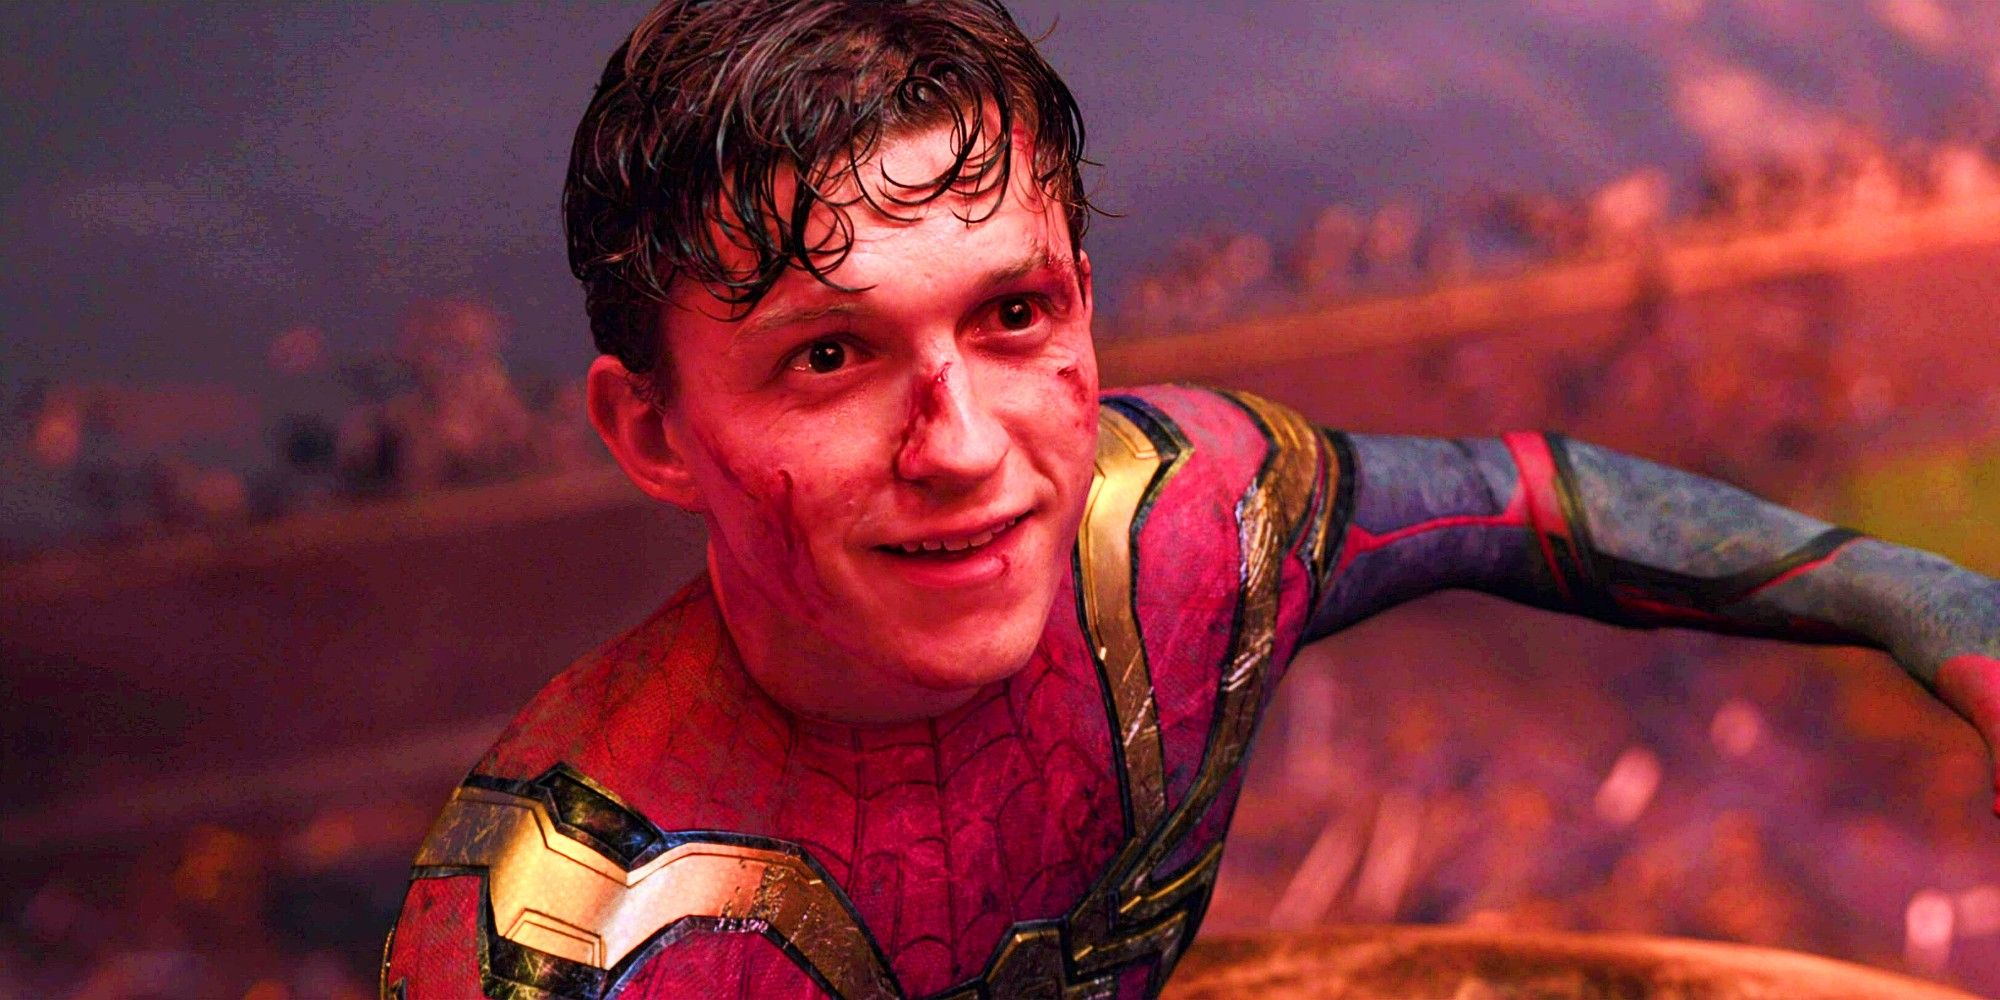 Spider-Man 4 release date: New rumor may have revealed when Tom